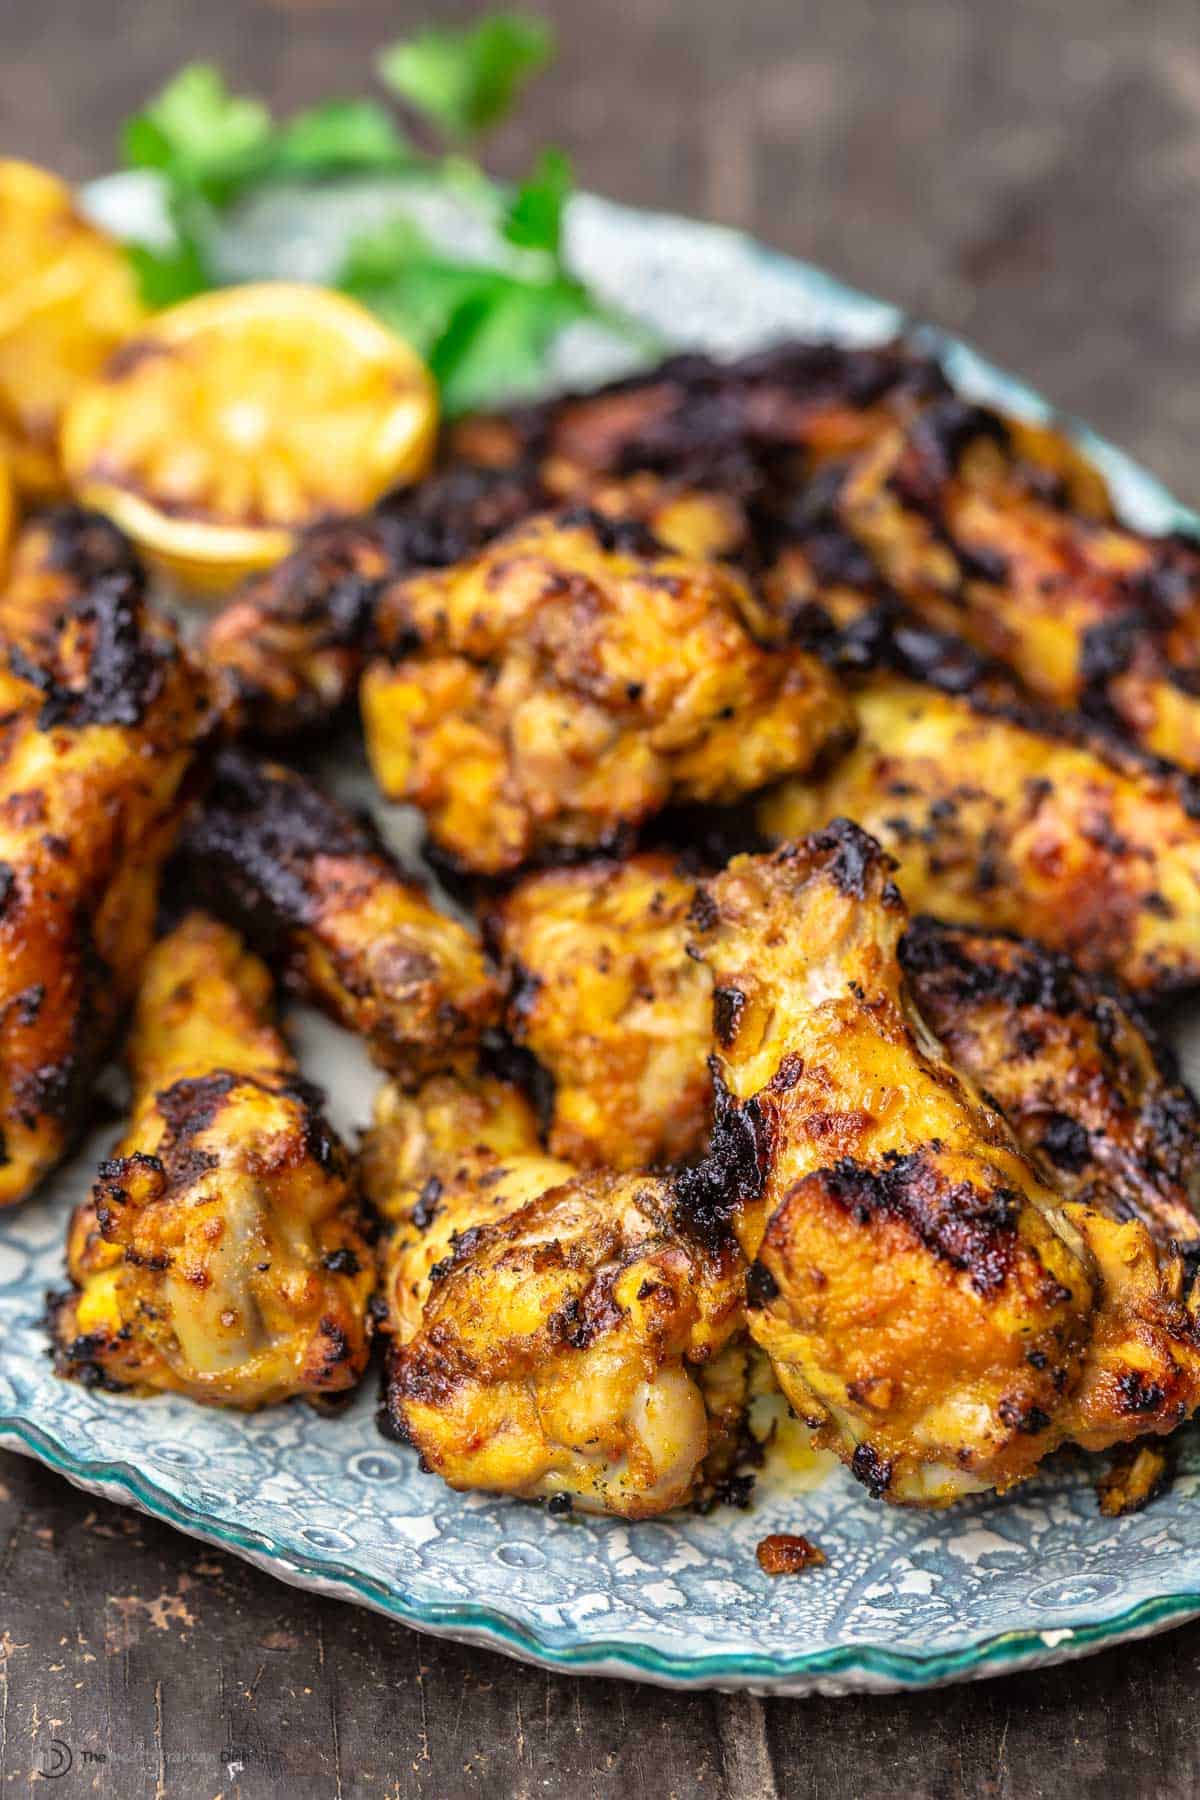 Grilled chicken wings piled on a plate